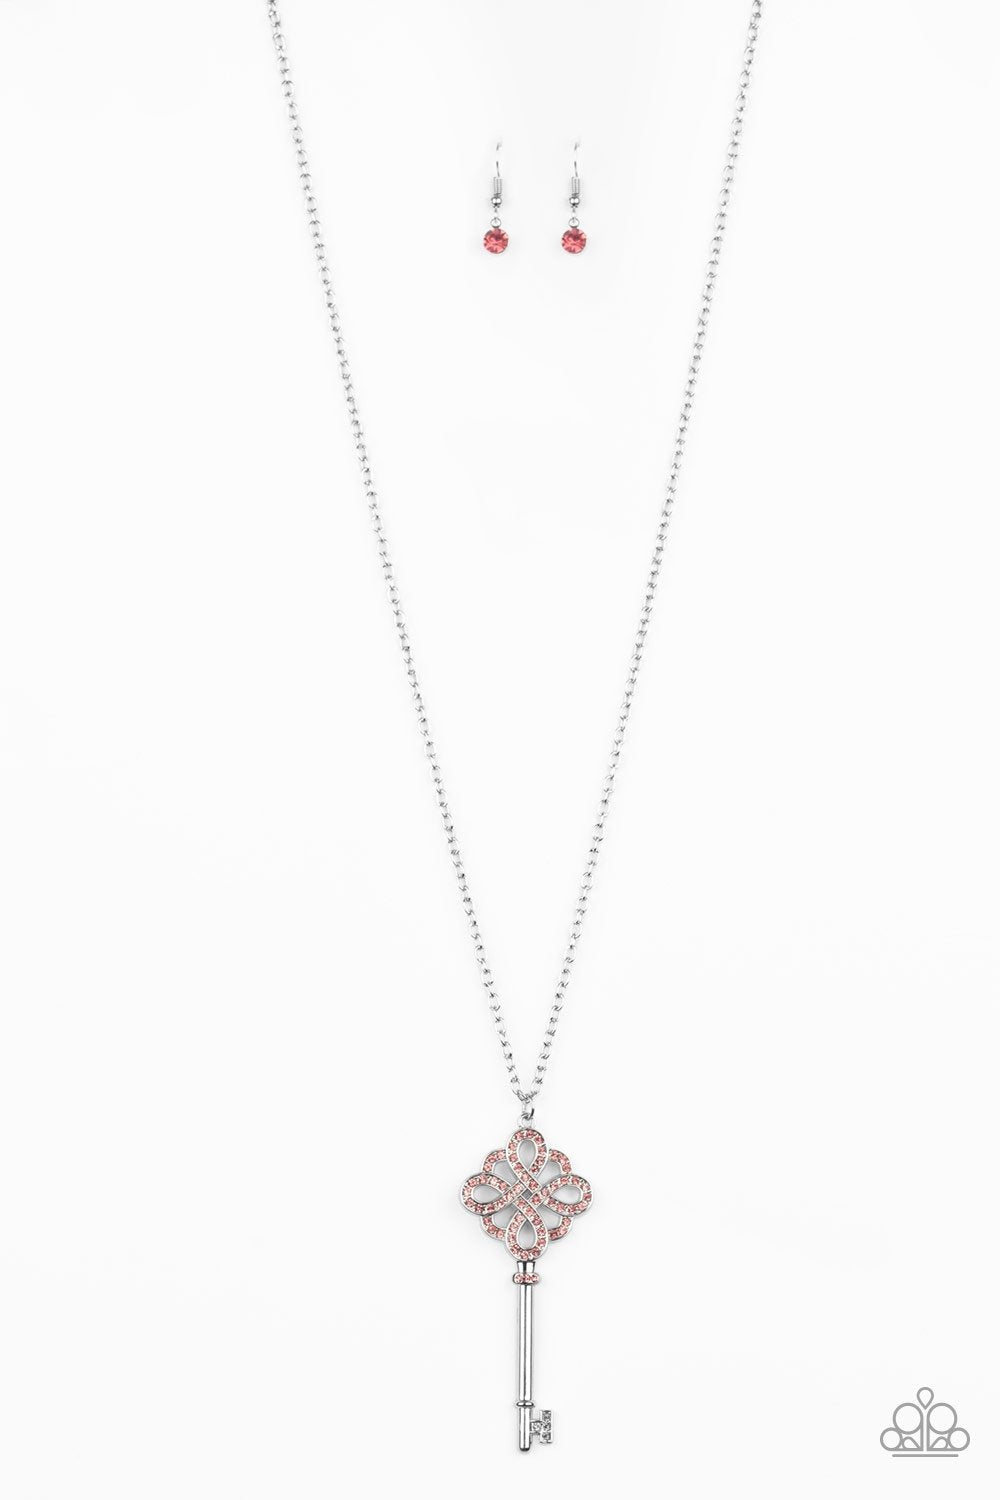 Unlocked Pink Rhinestone Key Pendant Necklace - Paparazzi Accessories LOTP Exclusive May 2020-CarasShop.com - $5 Jewelry by Cara Jewels